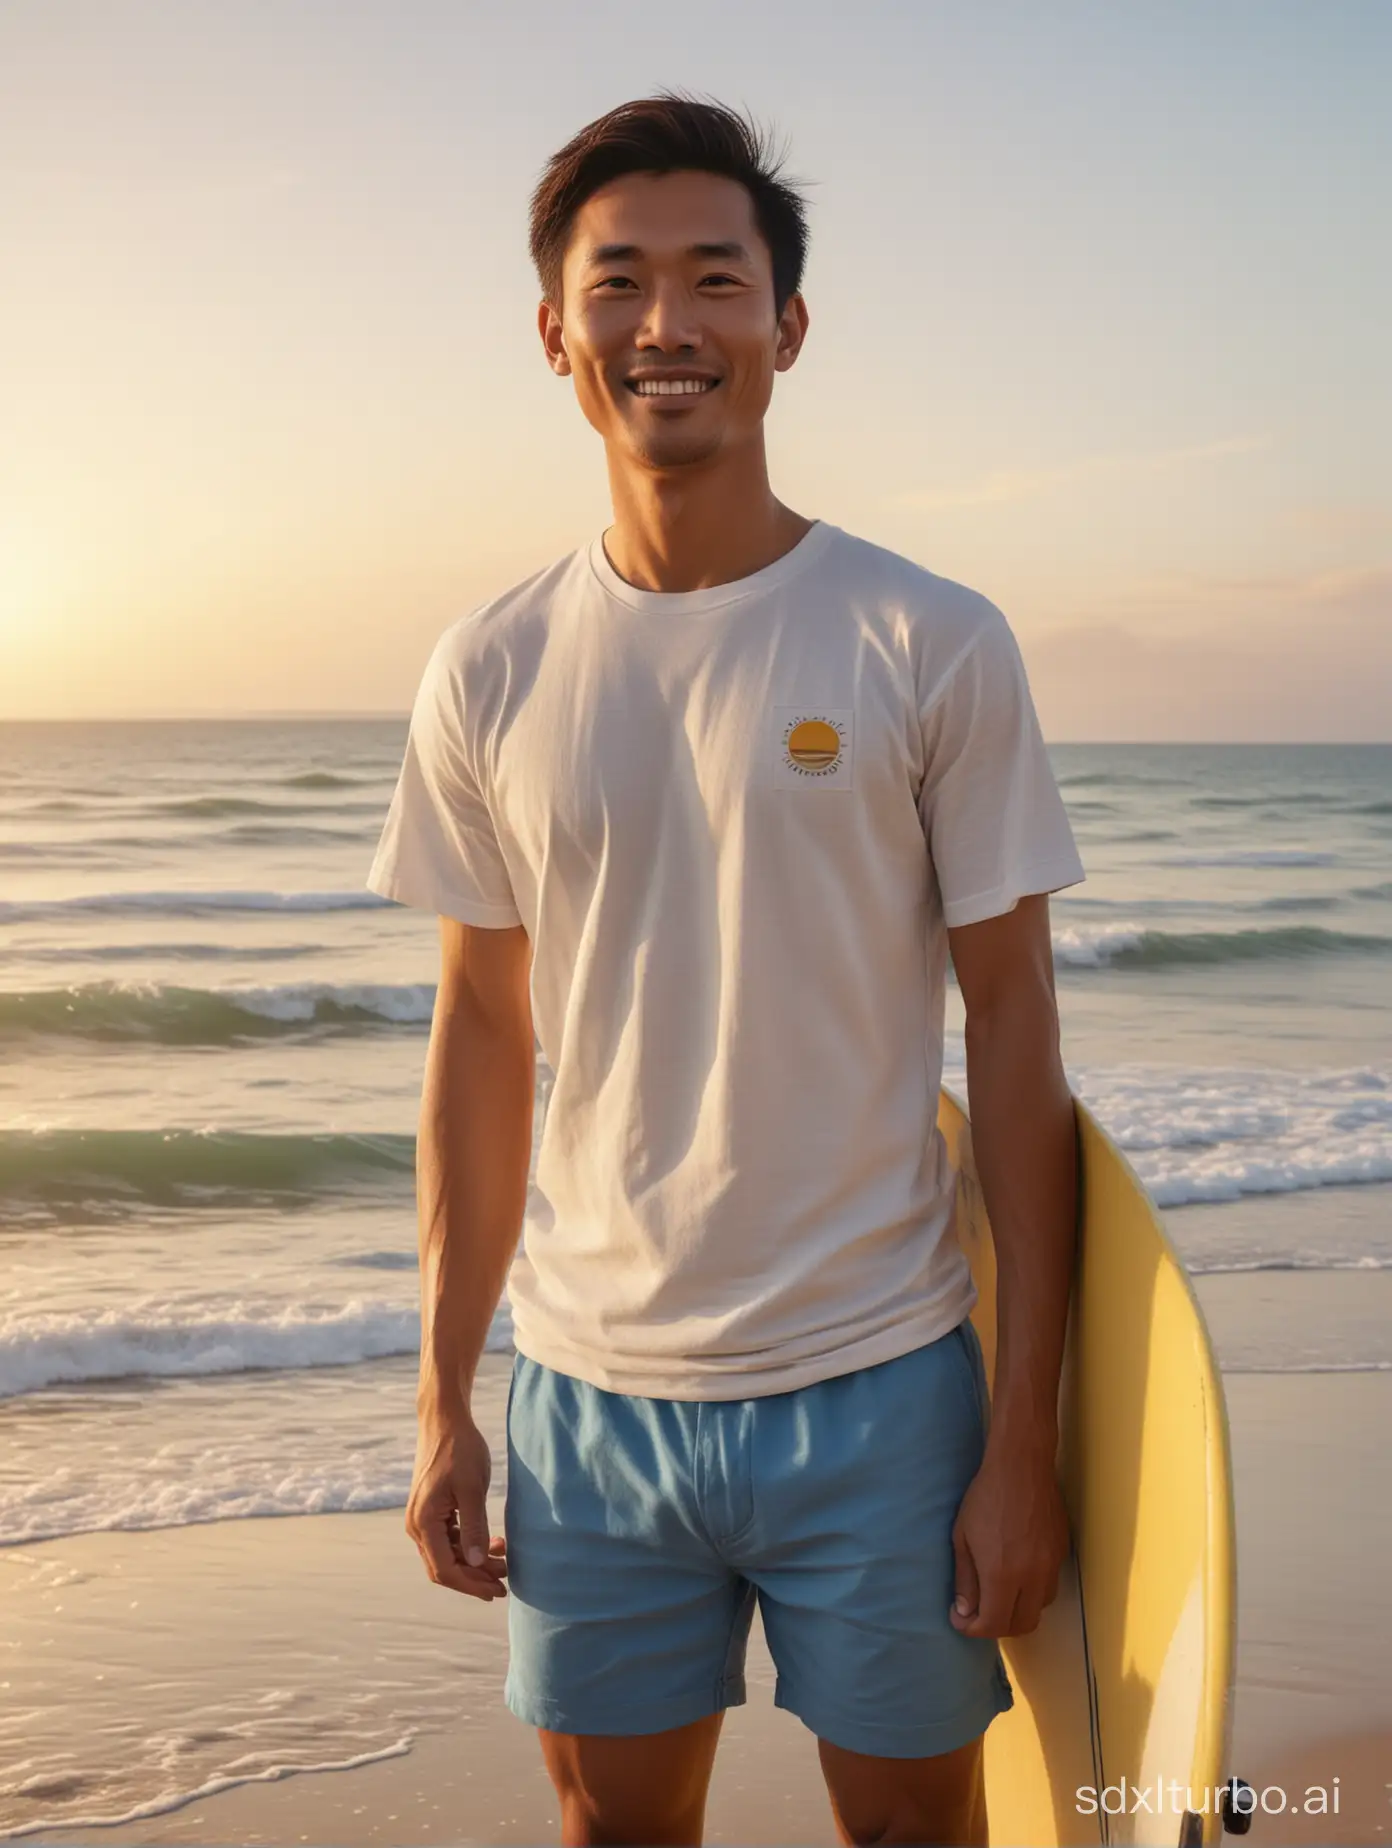 A handsome Chinese surfing coach stands on a golden beach against the backdrop of the setting sun on the sea. He is wearing a damp white T-shirt and blue shorts, with a sunny smile on his face and a surfboard in his hand. Realistic style, 8K